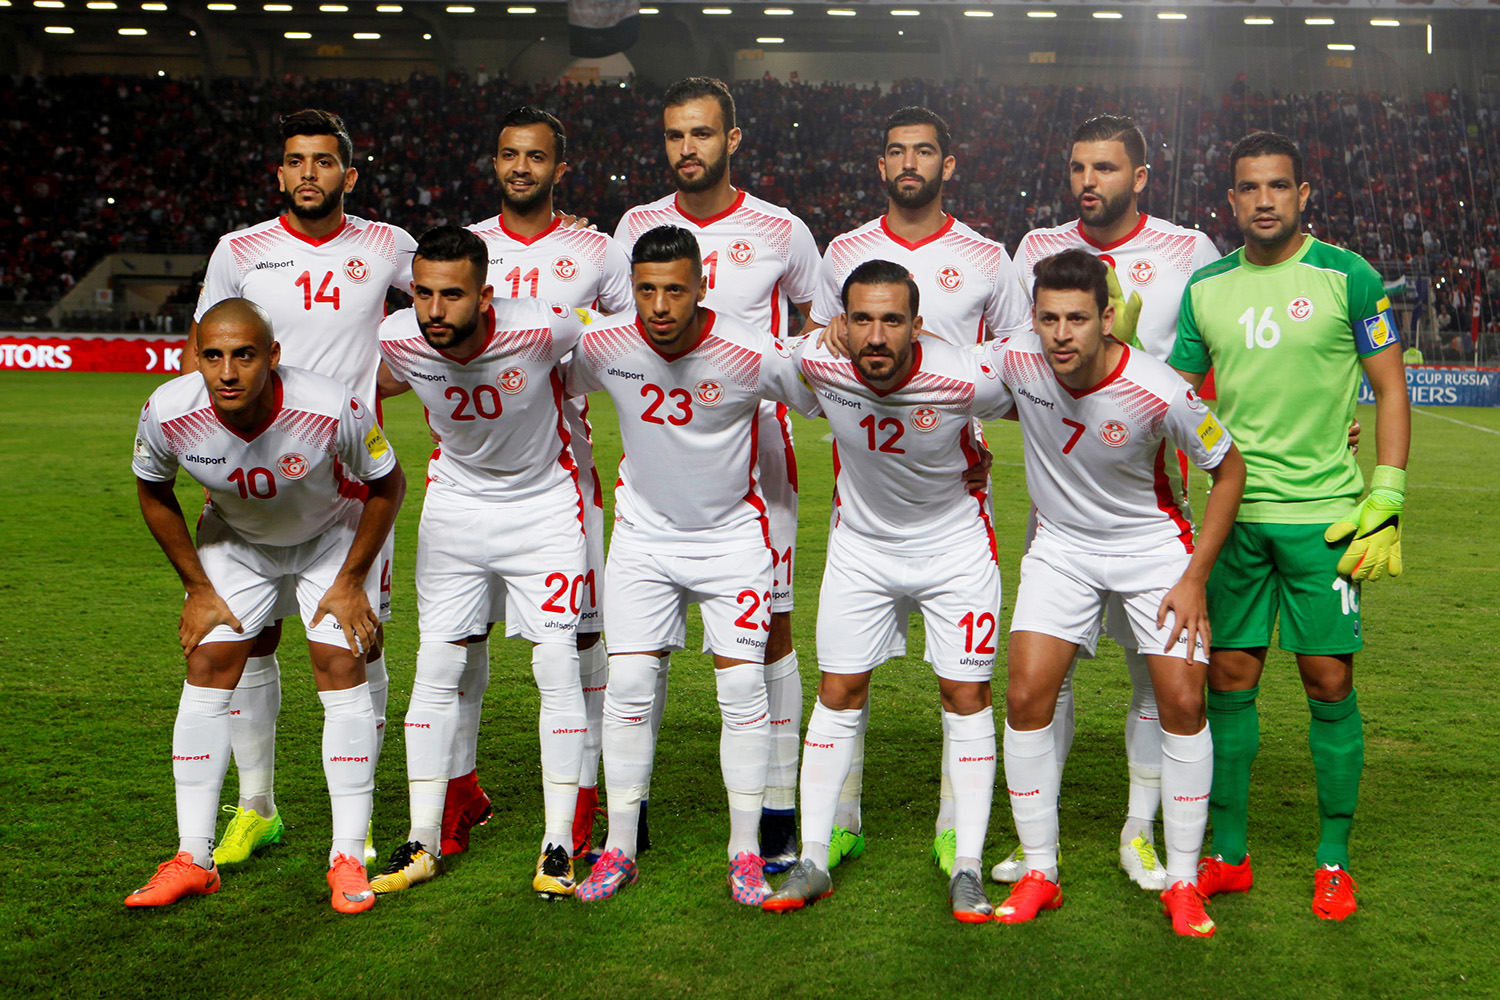 Soccer Football - 2018 World Cup Qualifications - Africa - Tunisia v Libya - Rades Olympic Stadium, Rades, Tunisia - November 11, 2017 Tunisia players pose for a team photo . REUTERS/Zoubeir Souissi